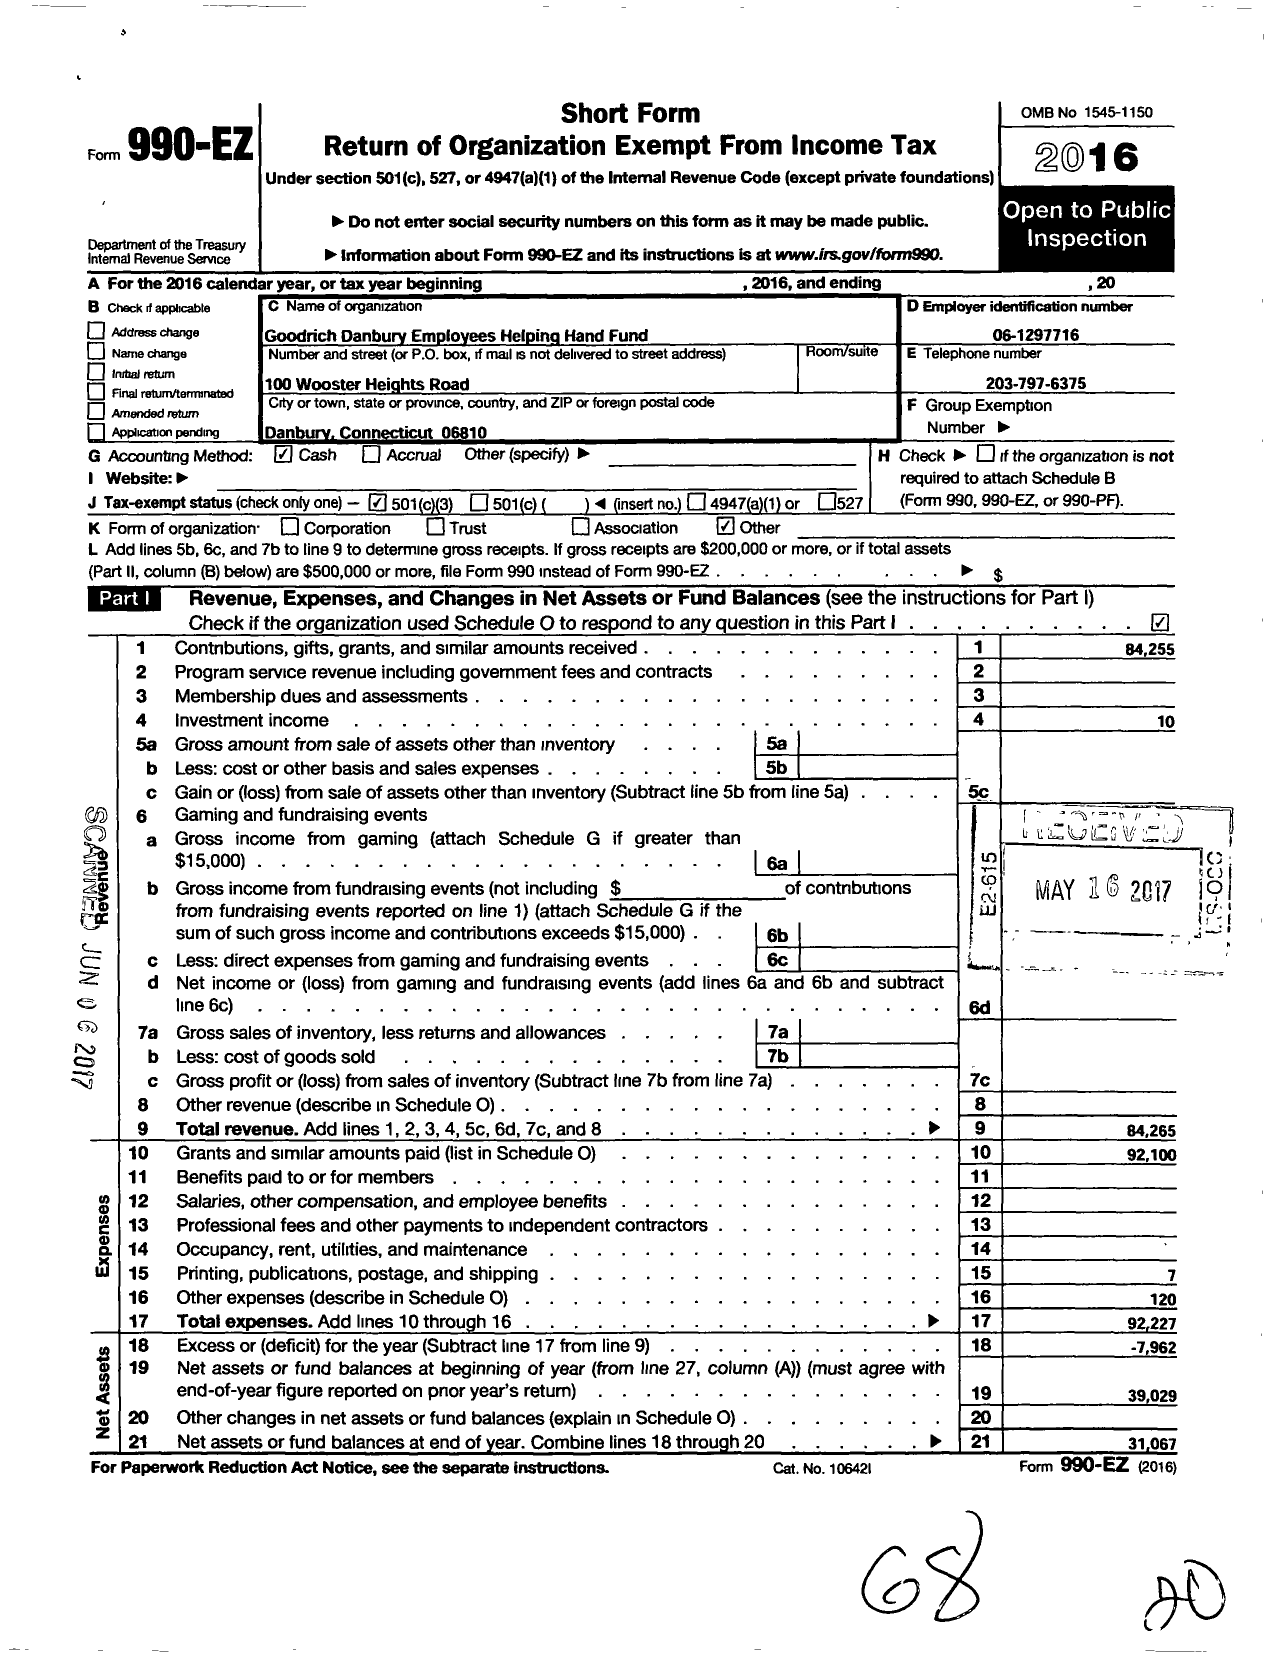 Image of first page of 2016 Form 990EZ for Goodrich Danbury Employees Helpling Hand Fund